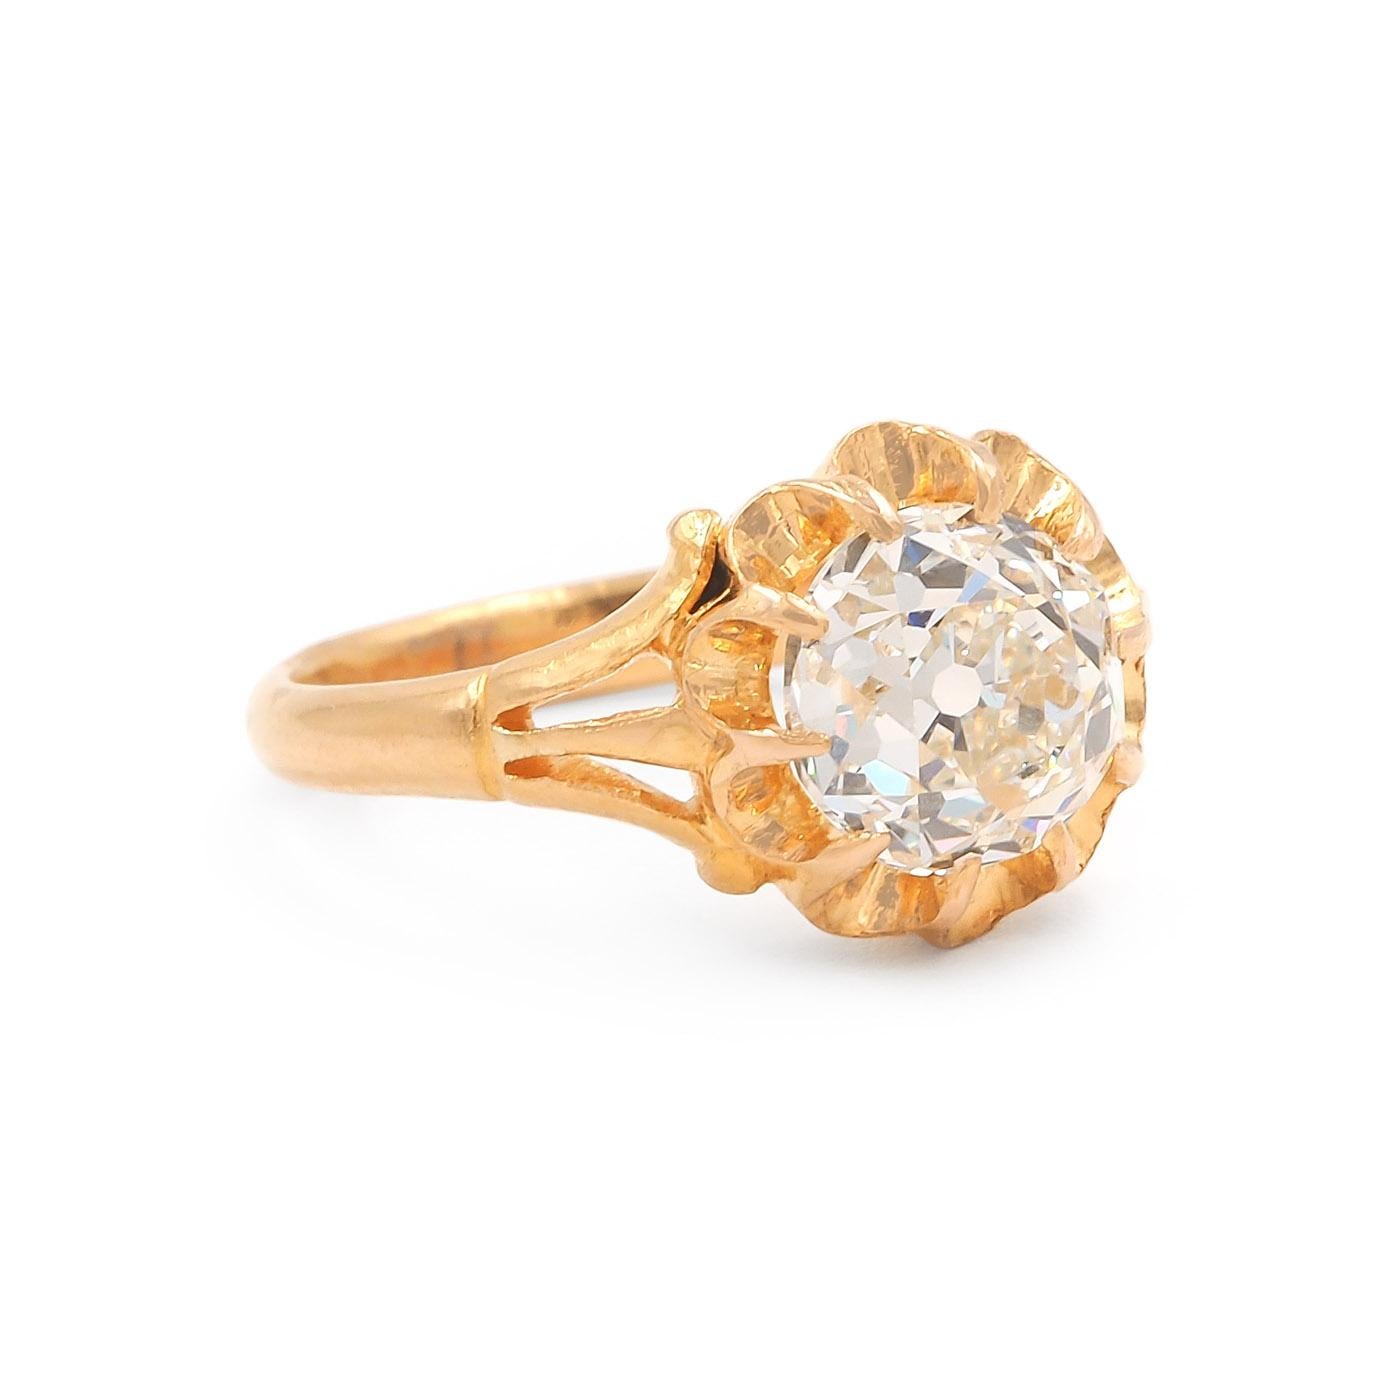 French Victorian Era Old European Cut Diamond Solitaire Engagement Ring composed of 18k yellow gold. The center stone 2.43 carat Old Mine Cut diamond is GIA certified L color & VS2 clarity. The diamond is set in a buttercup style setting, within